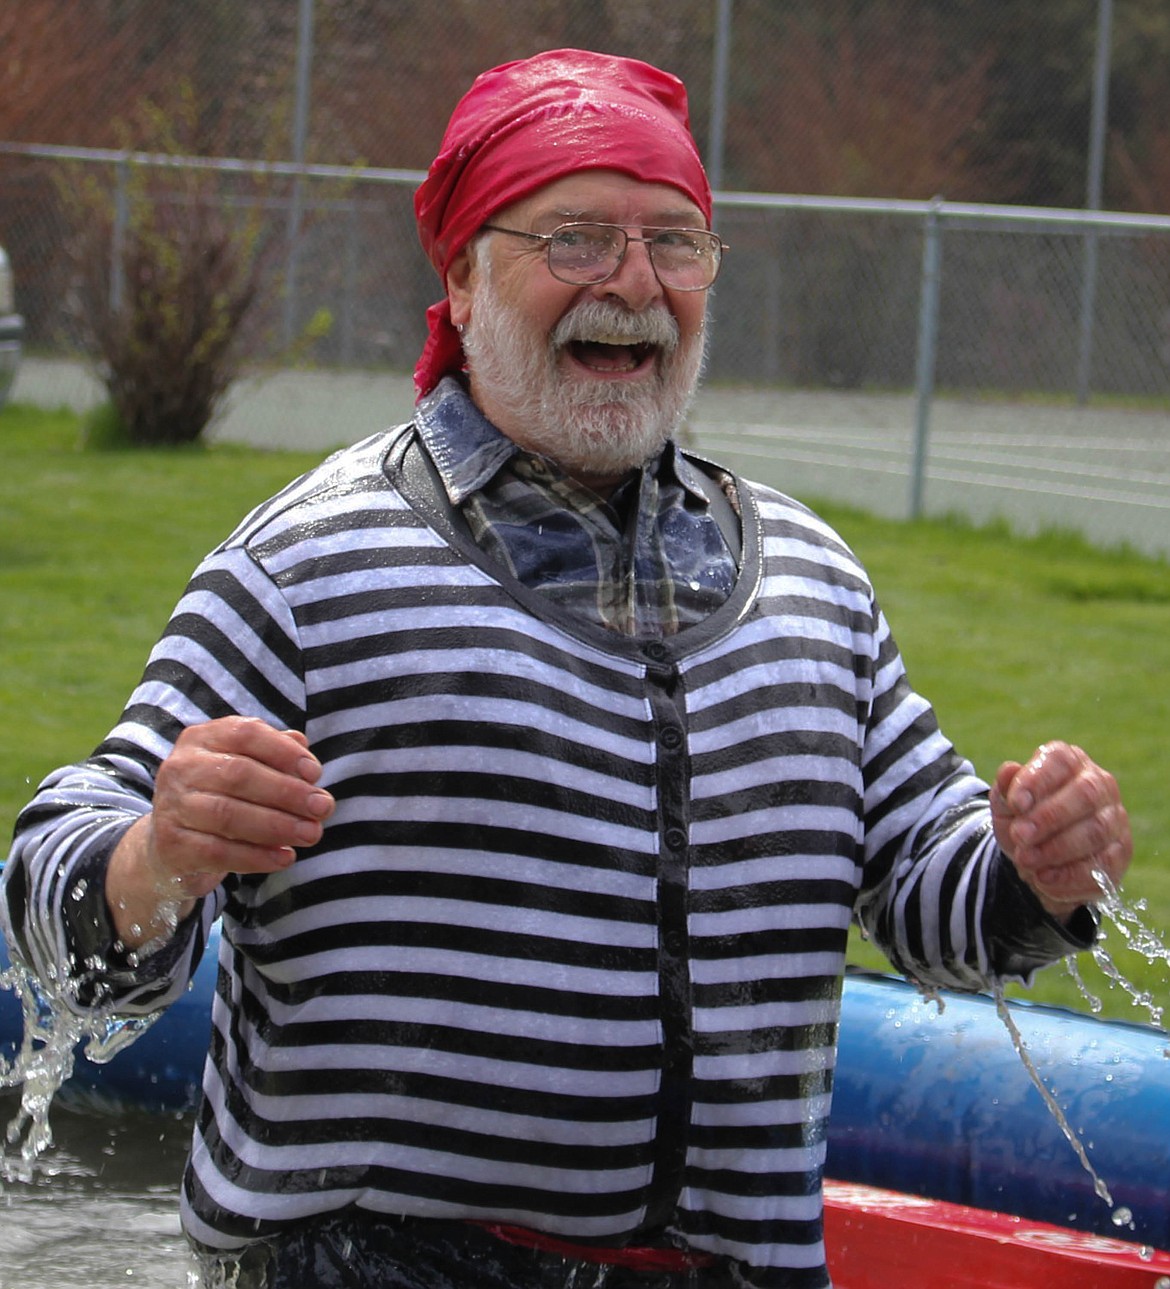 PIRATE TOM McCloskey braces the cold after plunging into the water at the Walk the Plank fundraiser in Superior. (Maggie Dresser photos/Mineral Independent)